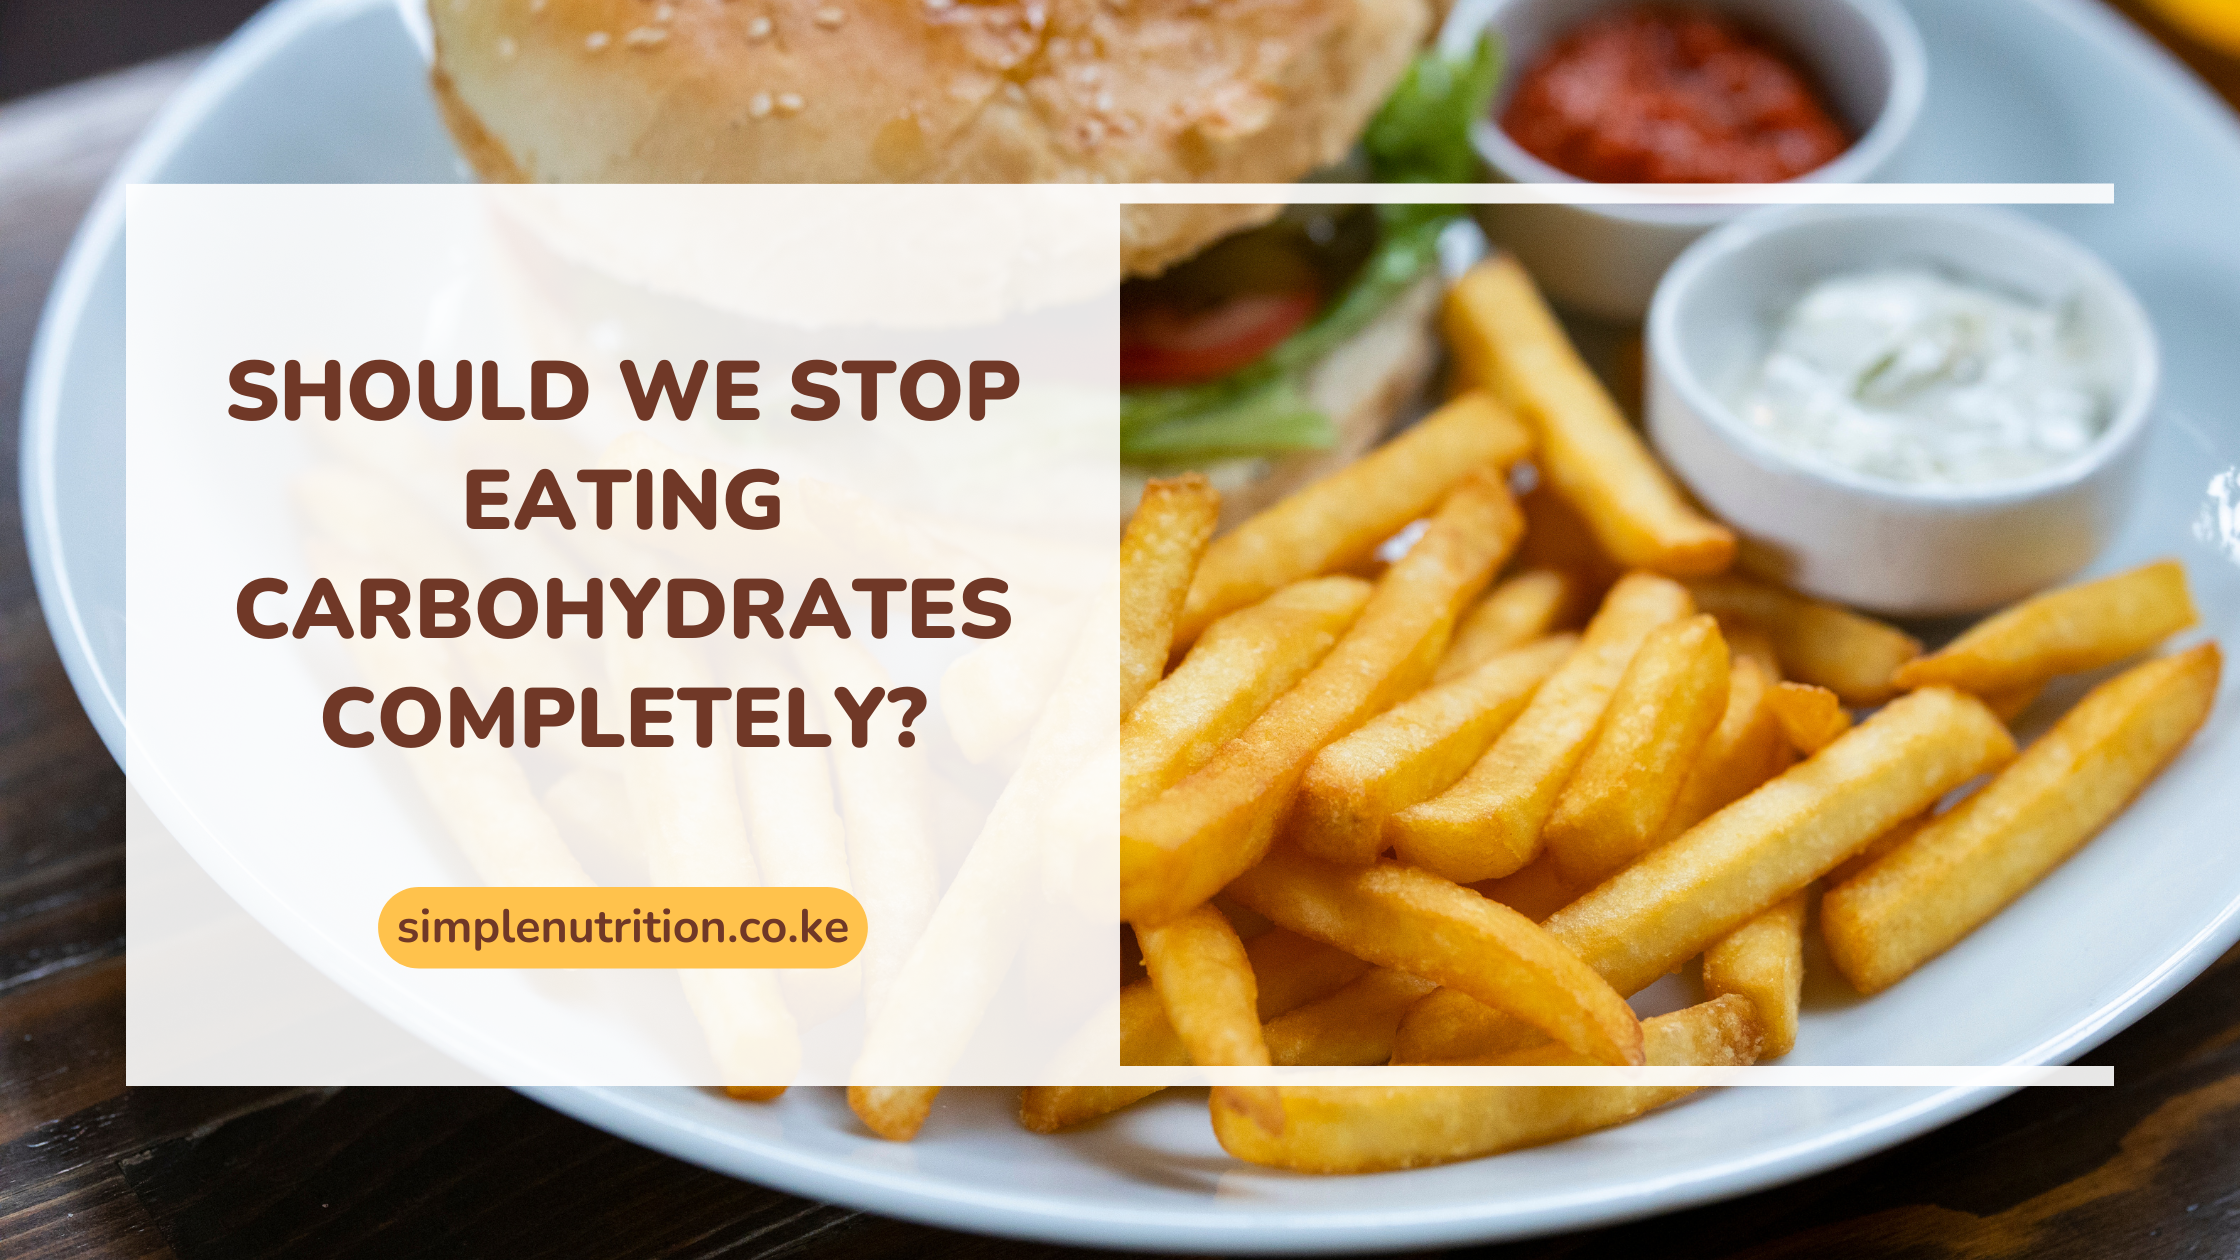 Should we stop eating carbohydrates completely?